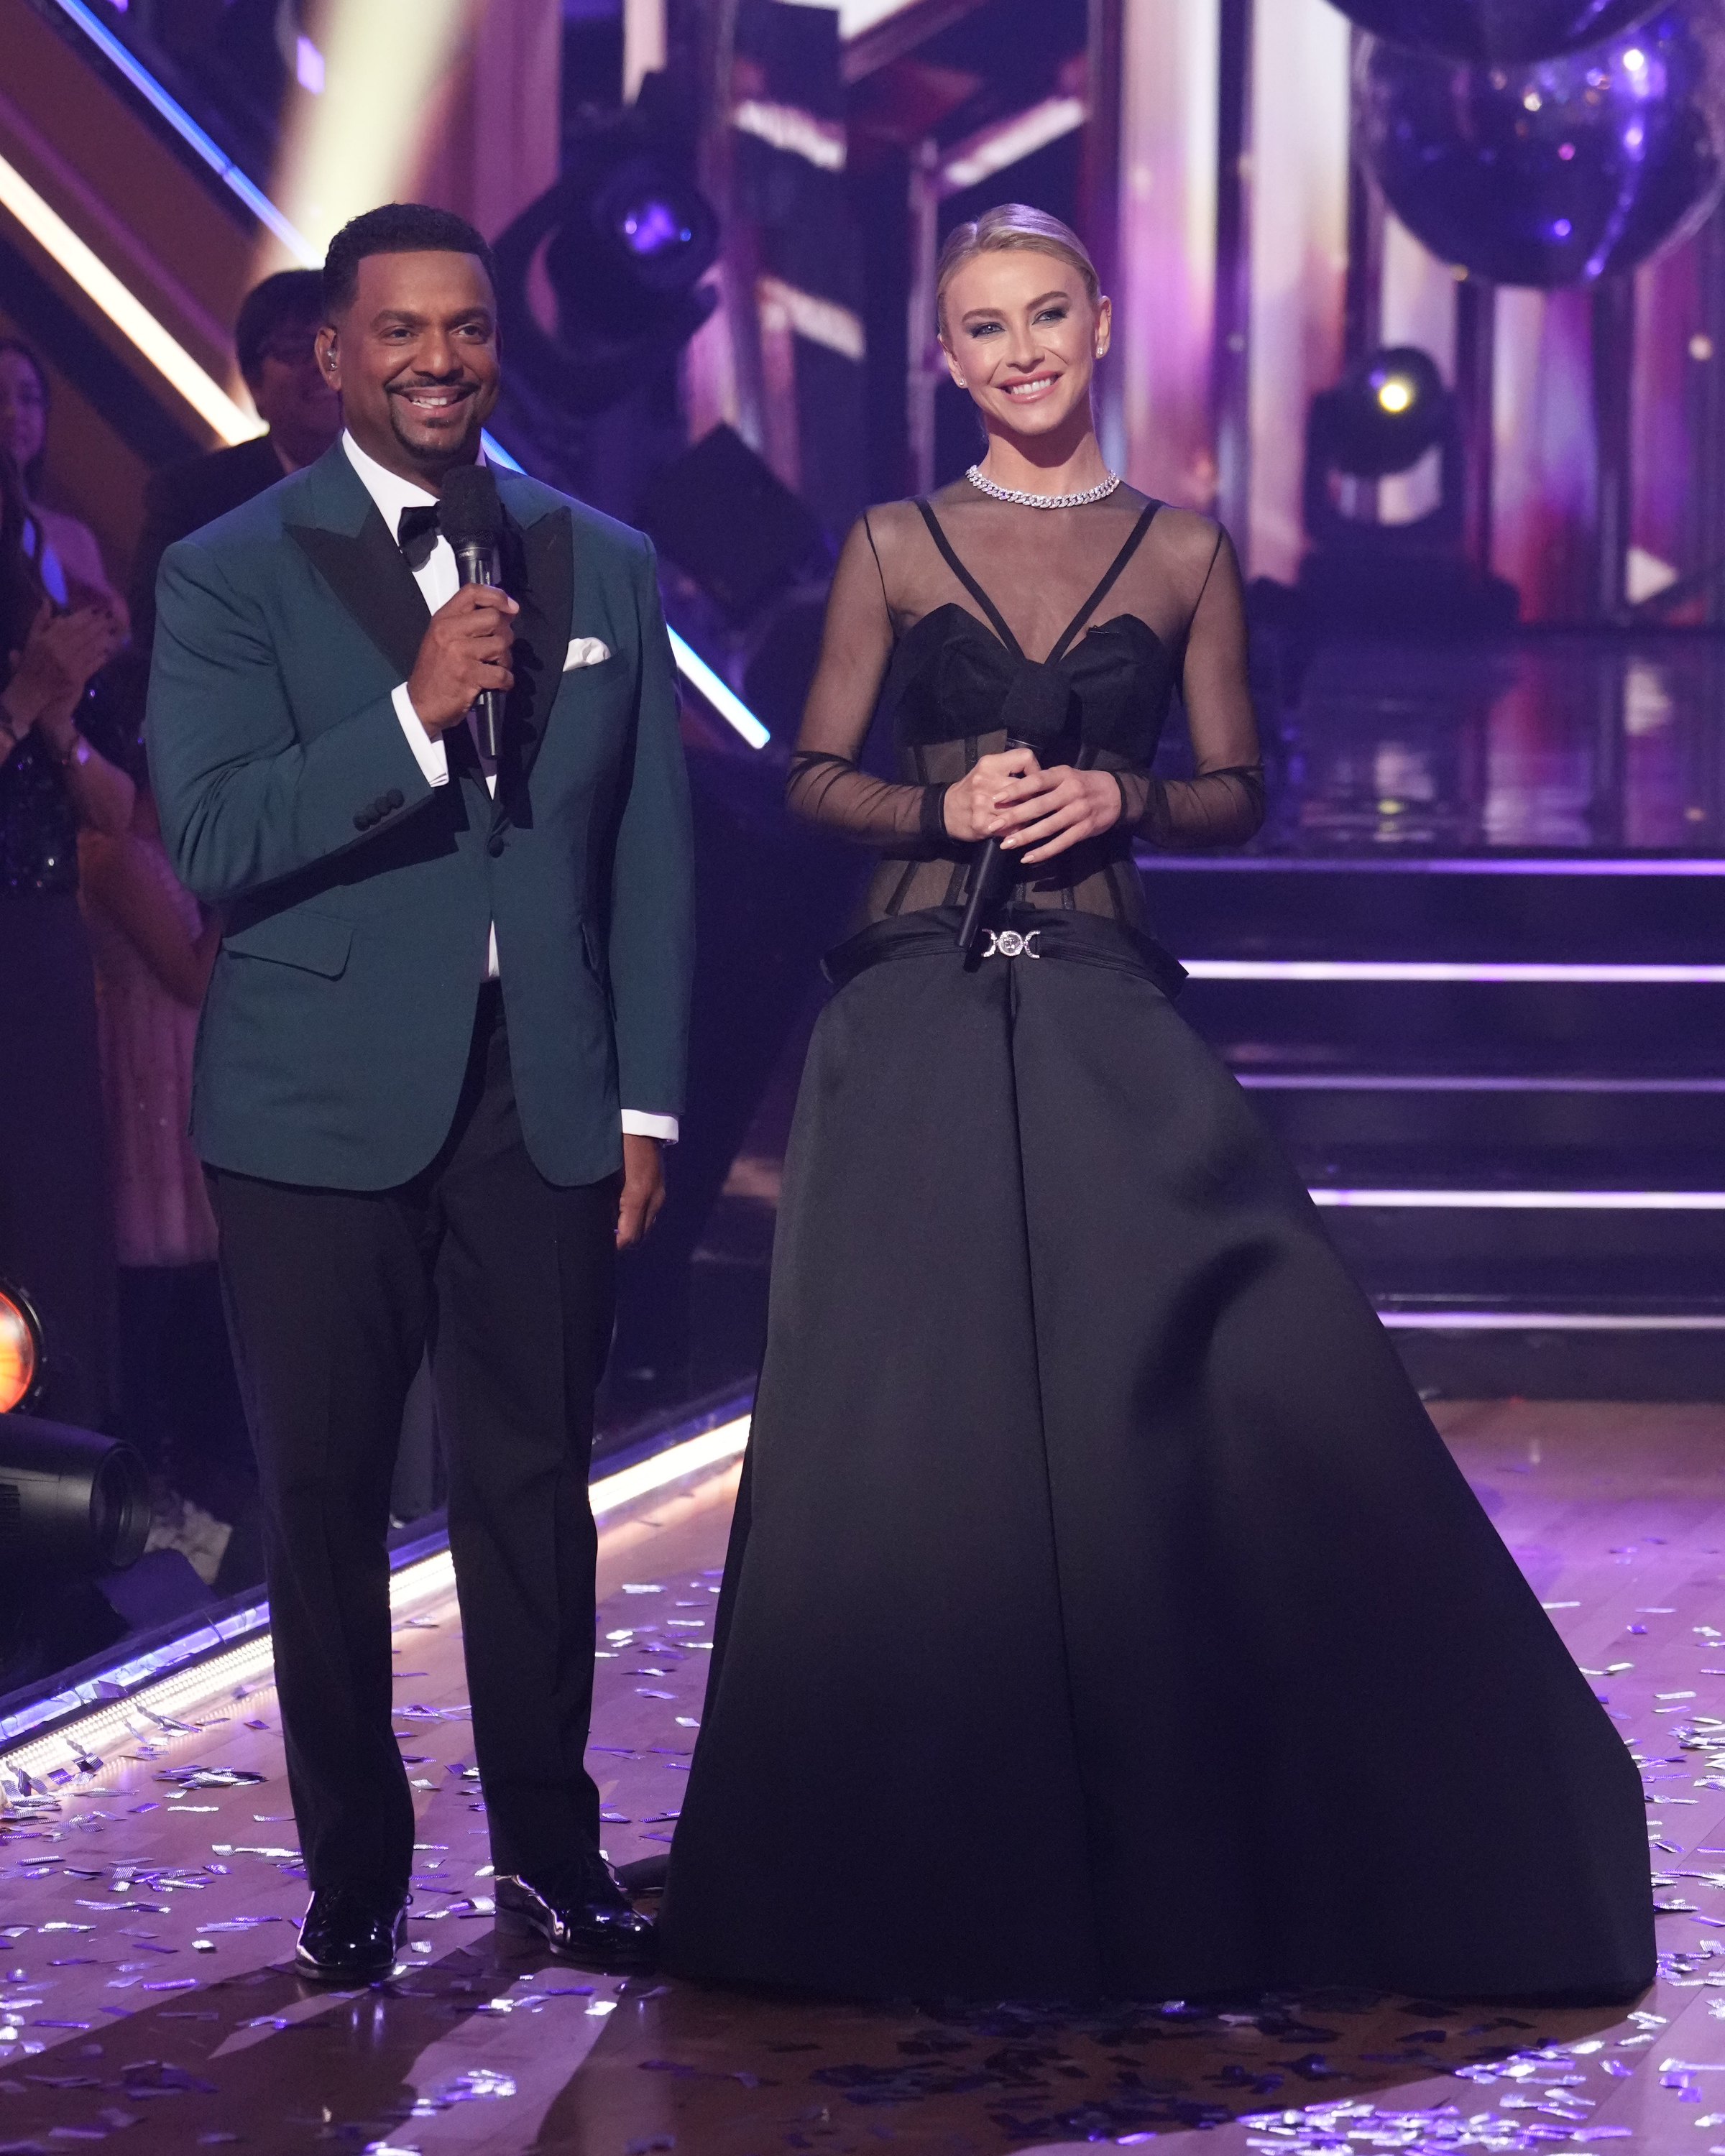 Julianne completed her first season as co-host of DWTS alongside Alfonso Ribeiro early last month